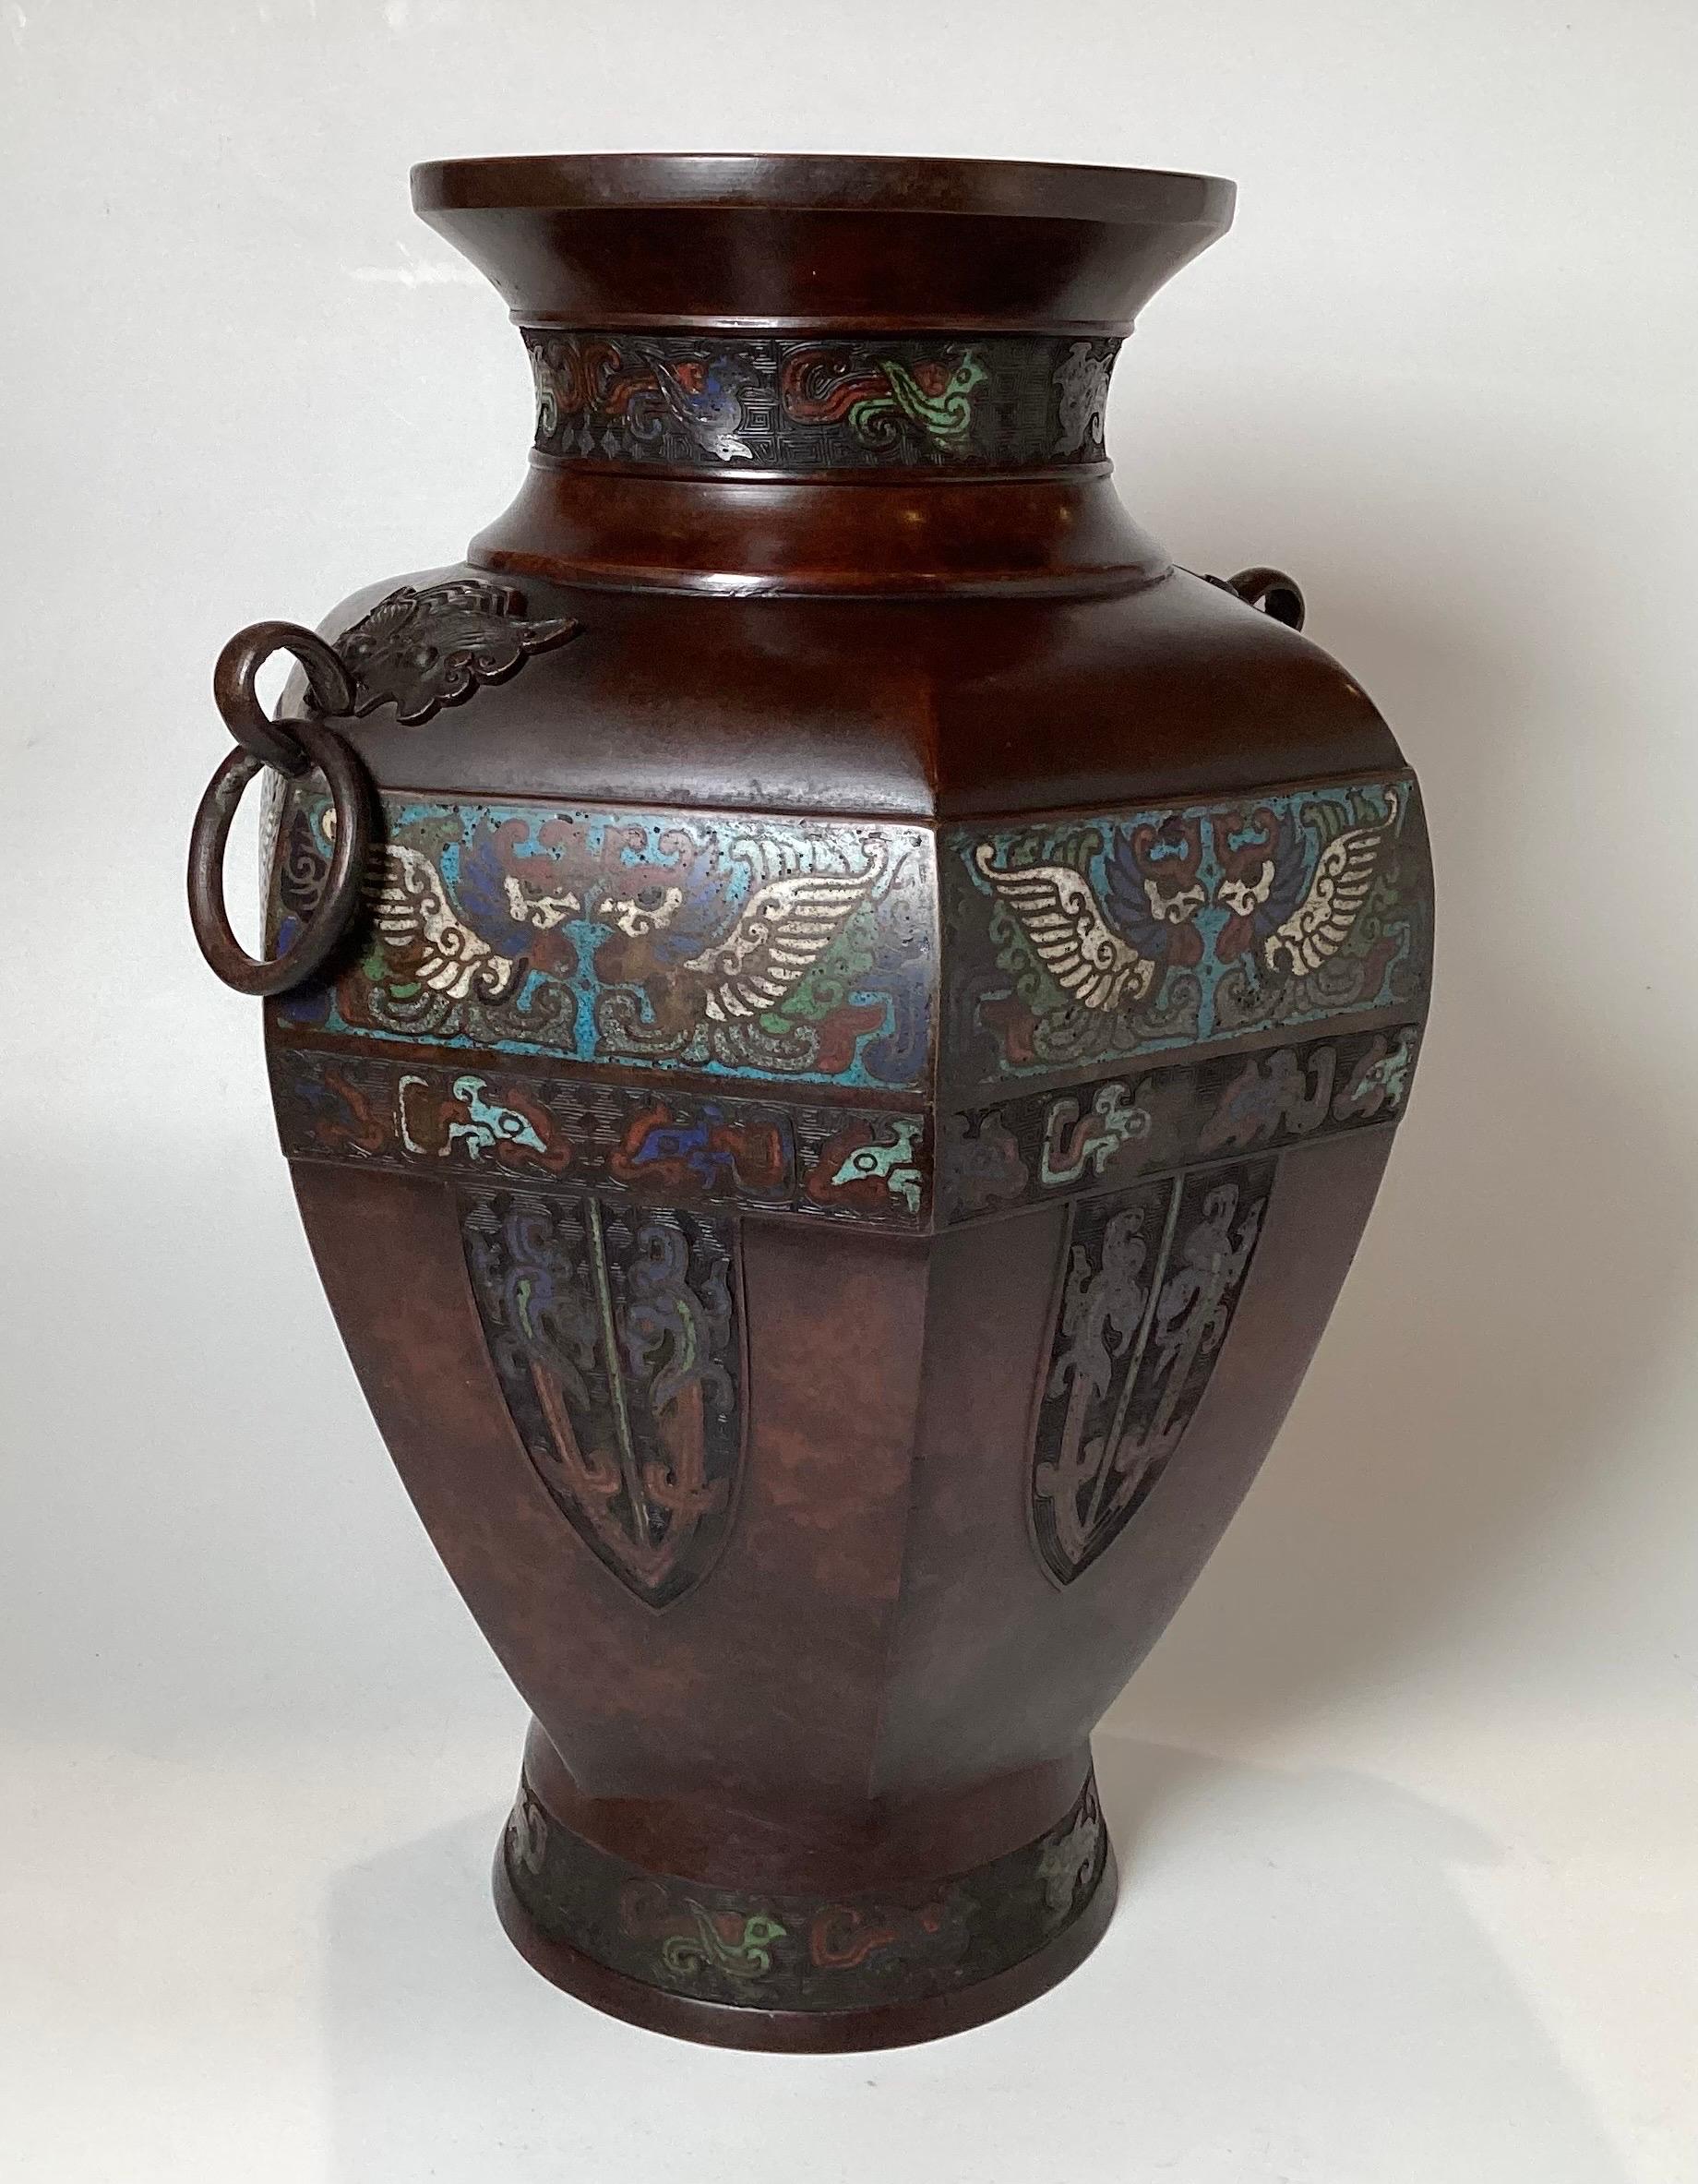 Circa !900 Japanese Large well shaped bronze champleve enameled vase.. 
Six paneled sides with Asian themed engravings on each panel.With two ringed handles. Original warm amber brown patina.